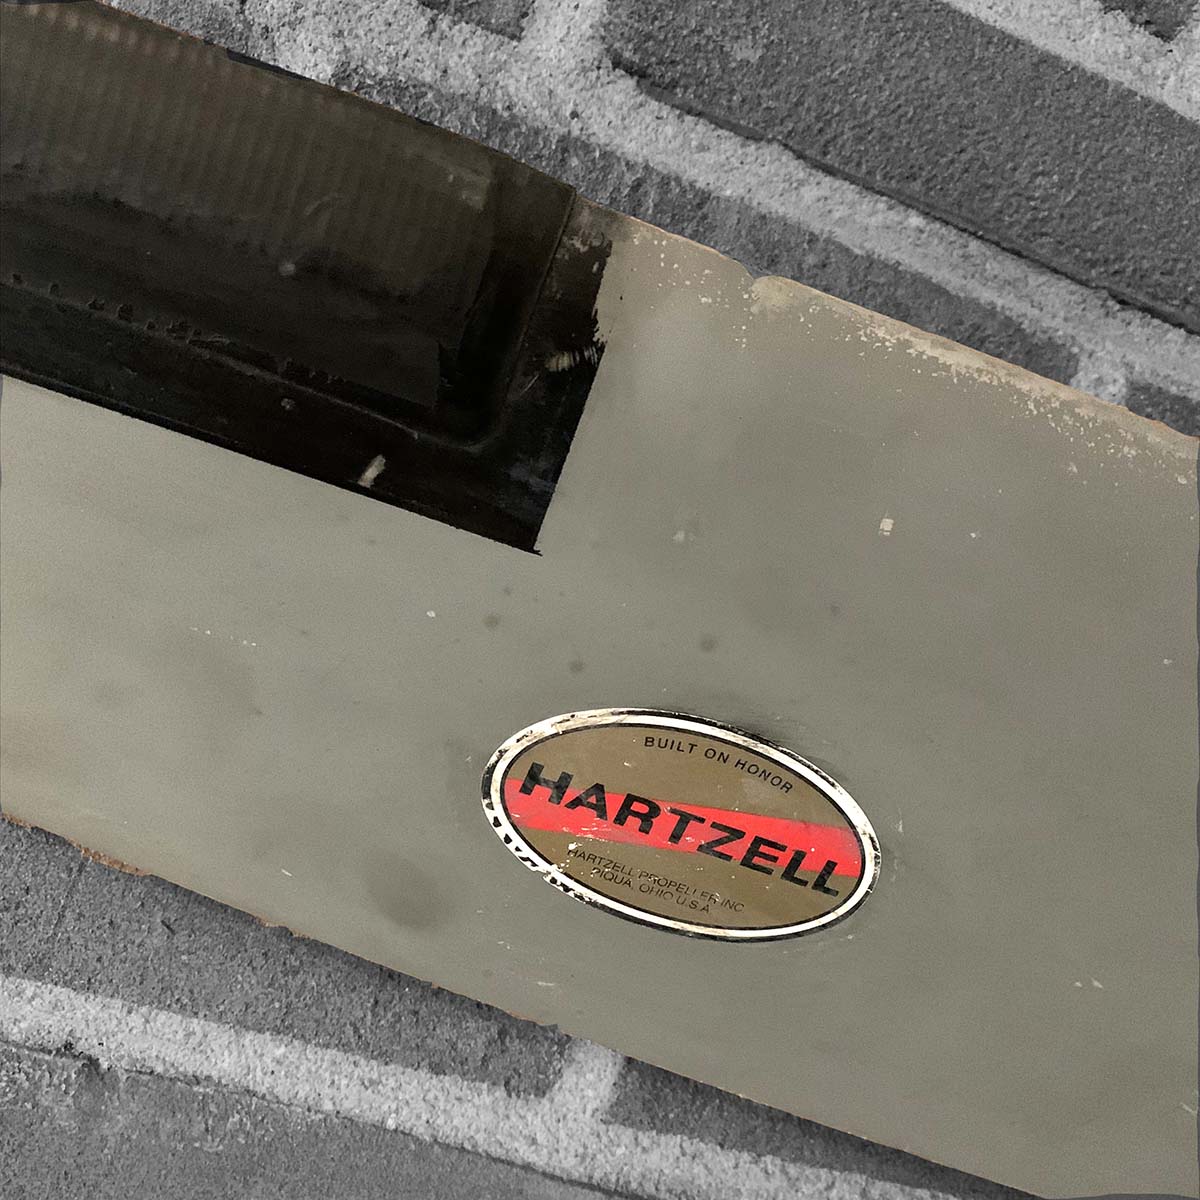 Photo of the Hartzell sticker on a propeller blade that has been modified to a decorative wall hanger.